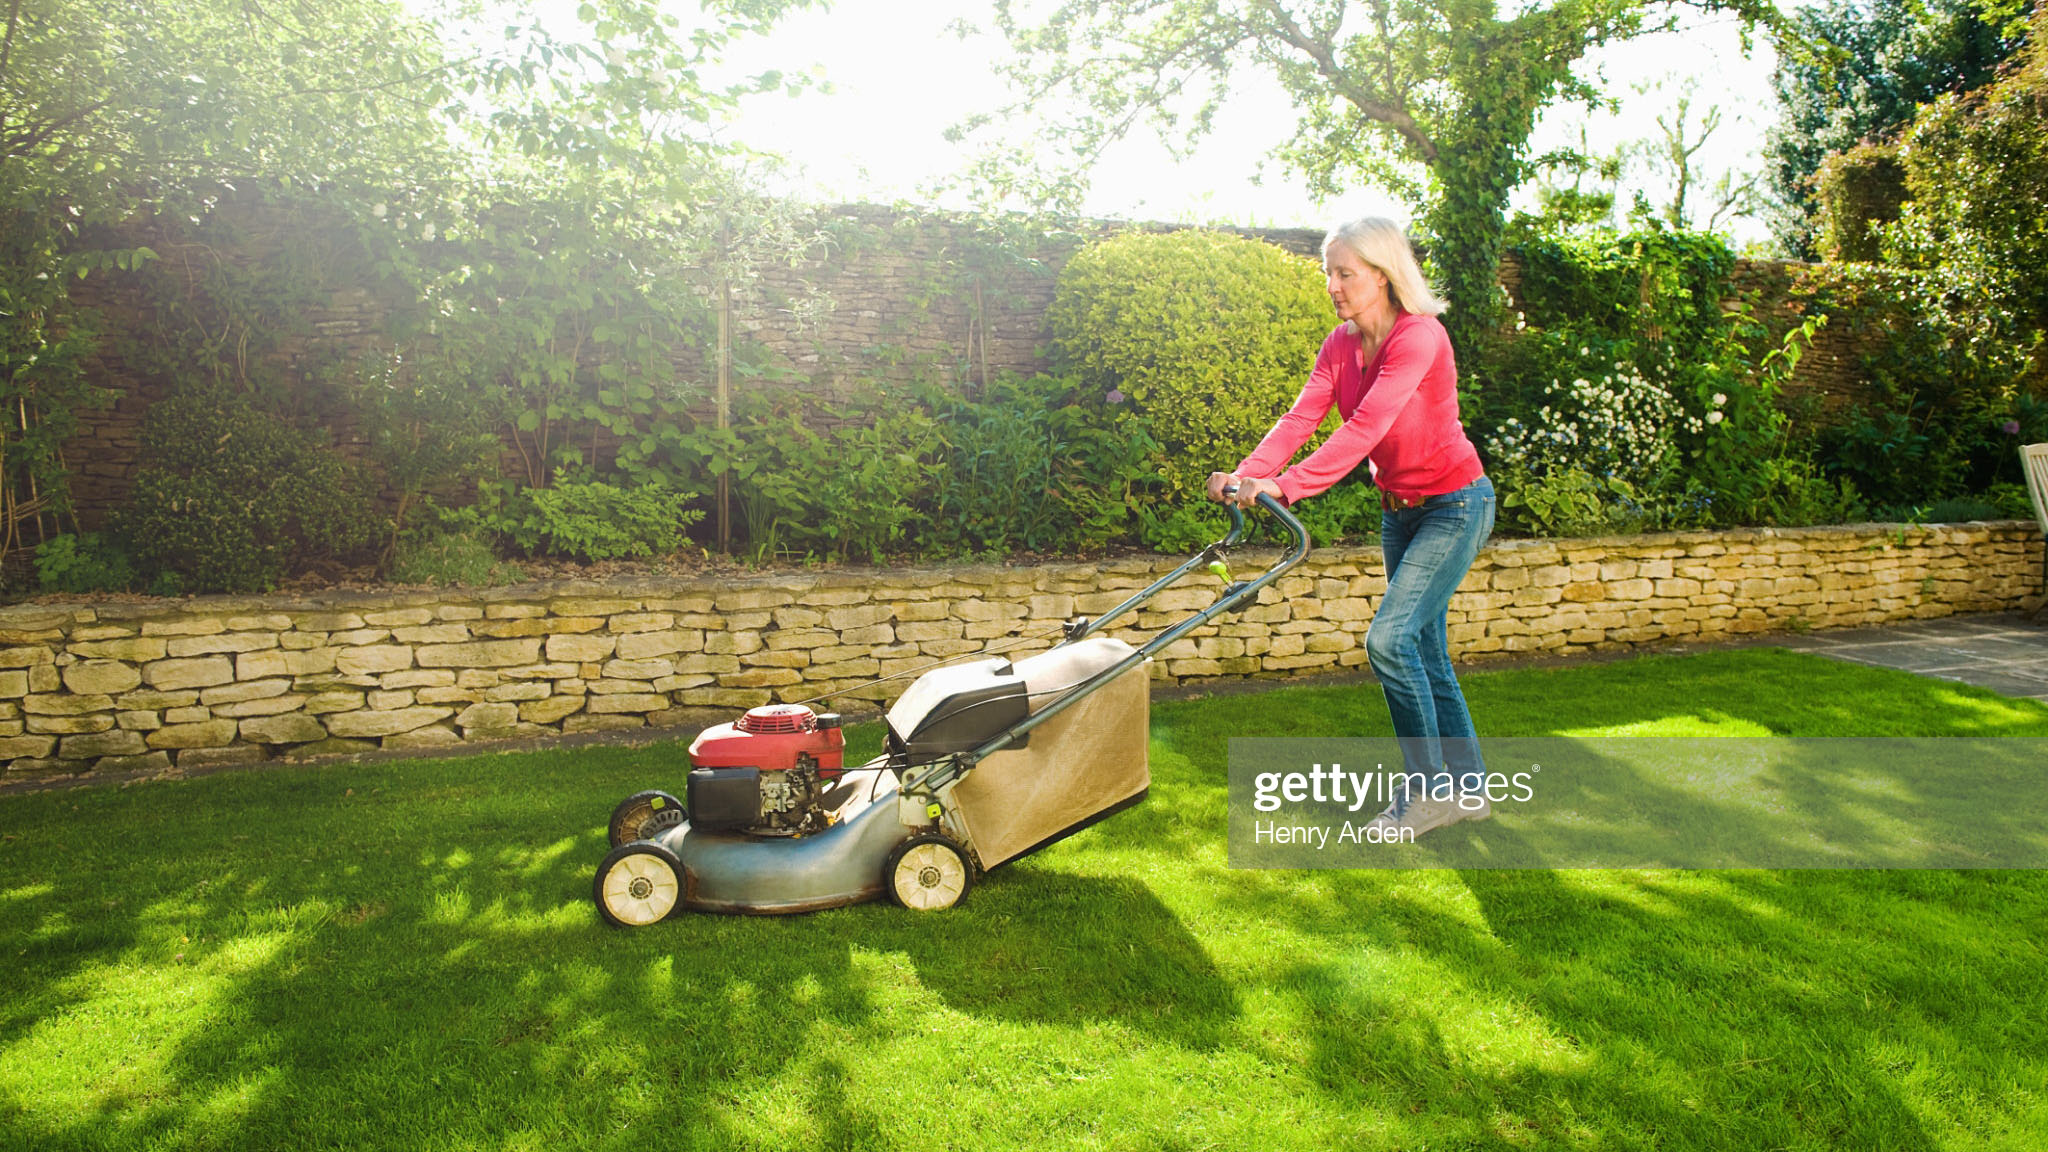 Best gas lawn mowers: A mature woman wearing a red top users a gas lawn mower to cut the grass on a sunny day